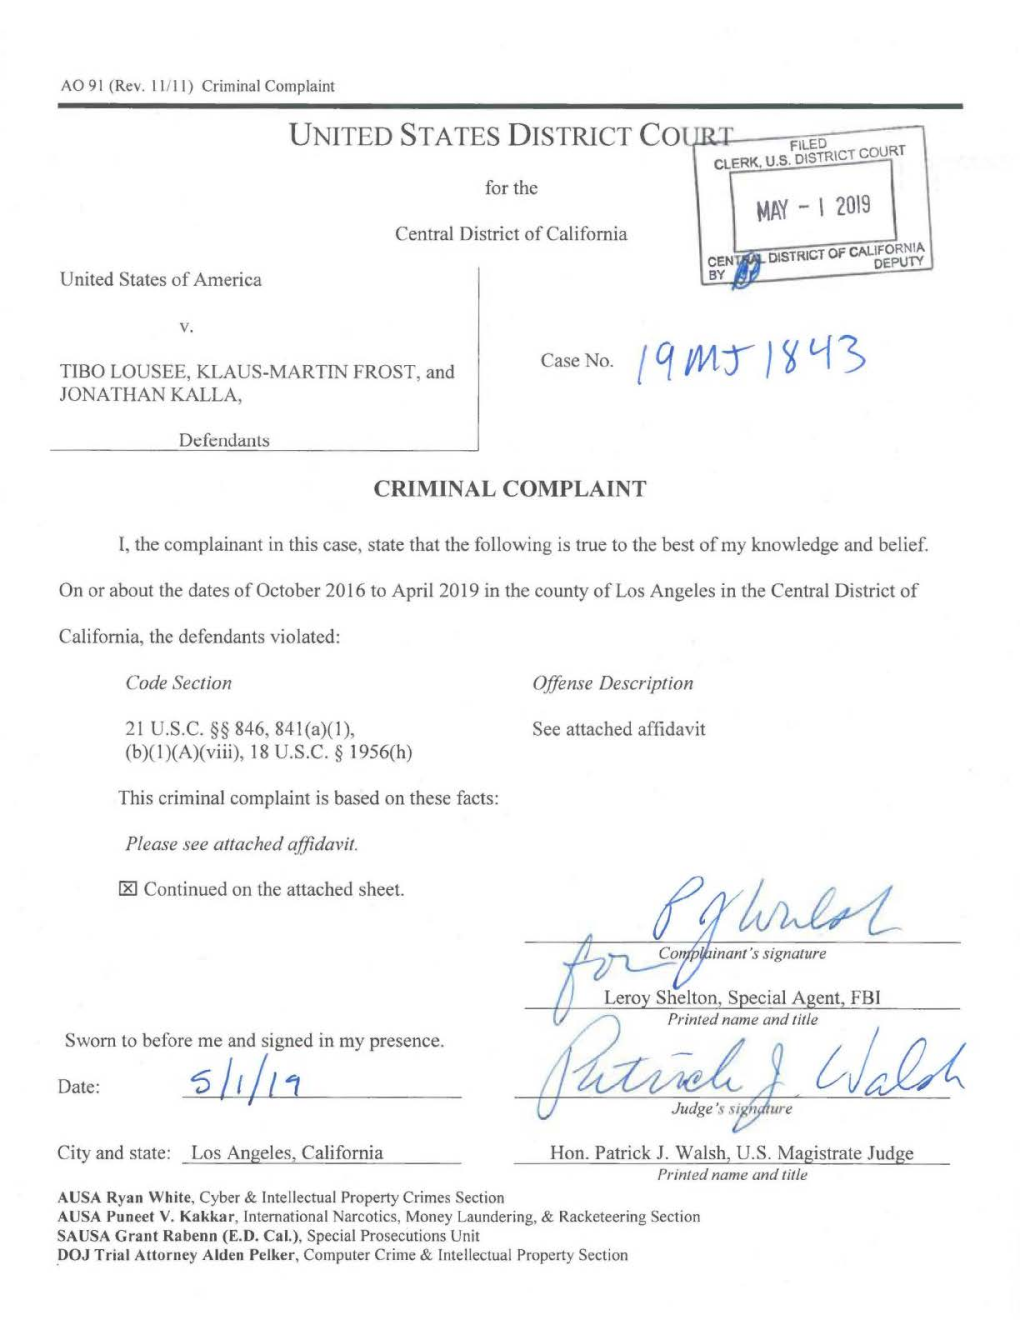 Download Criminal Complaint Filed in the Central District of California